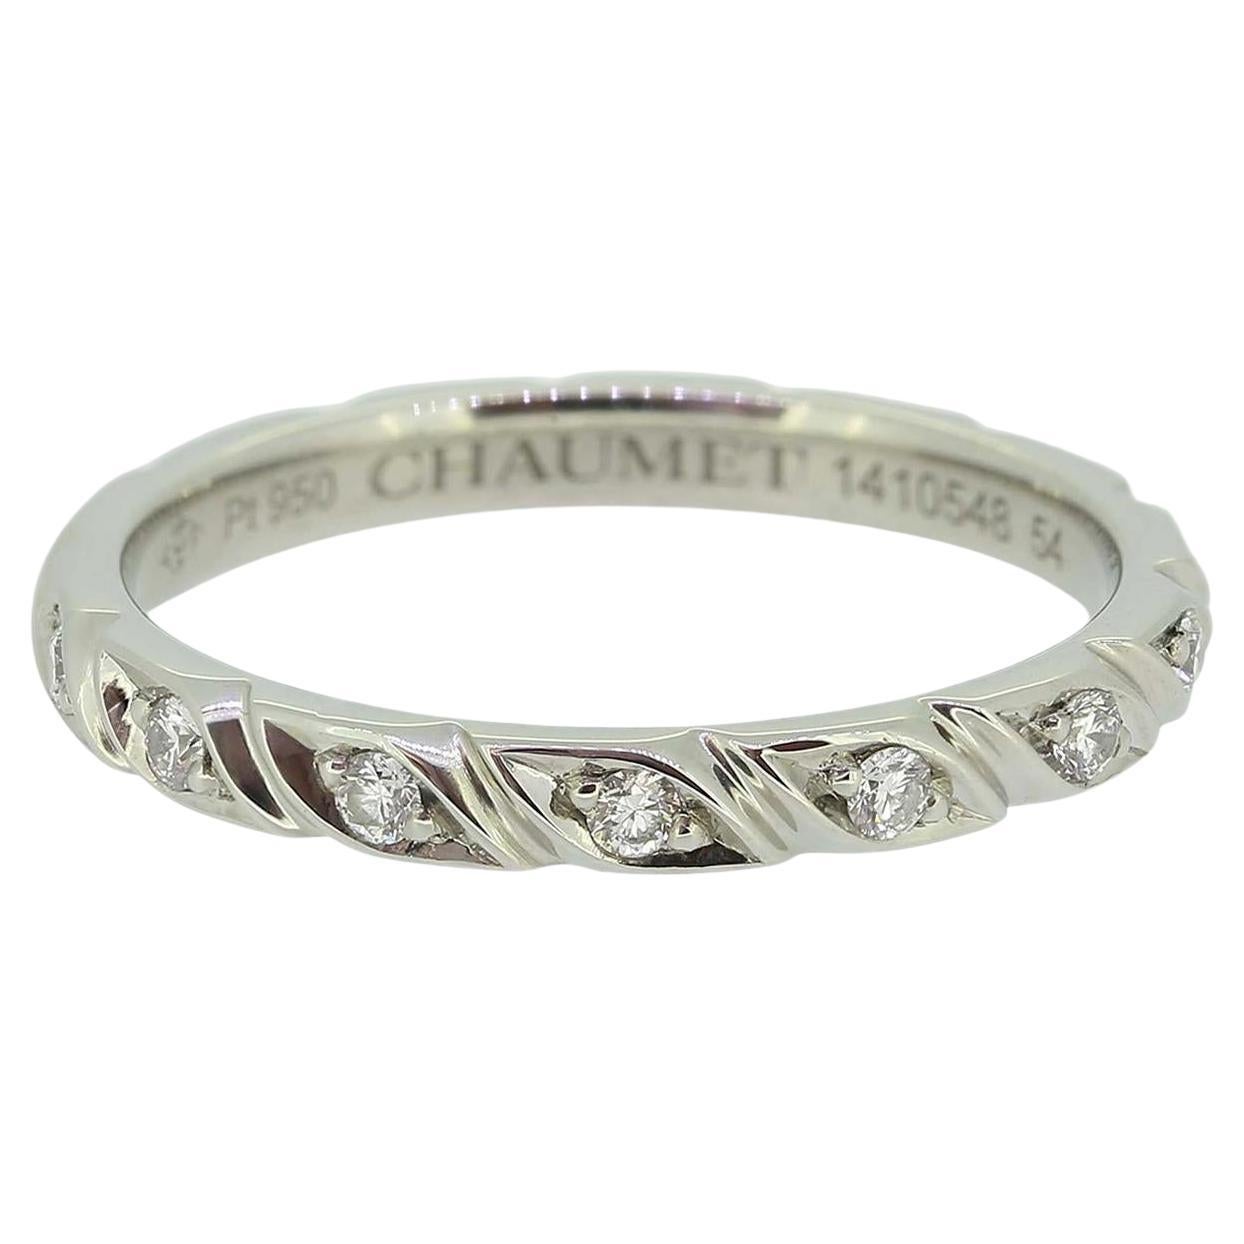 Chaumet Torsade De Chaumet Wedding Band Ring Size N (54) For Sale